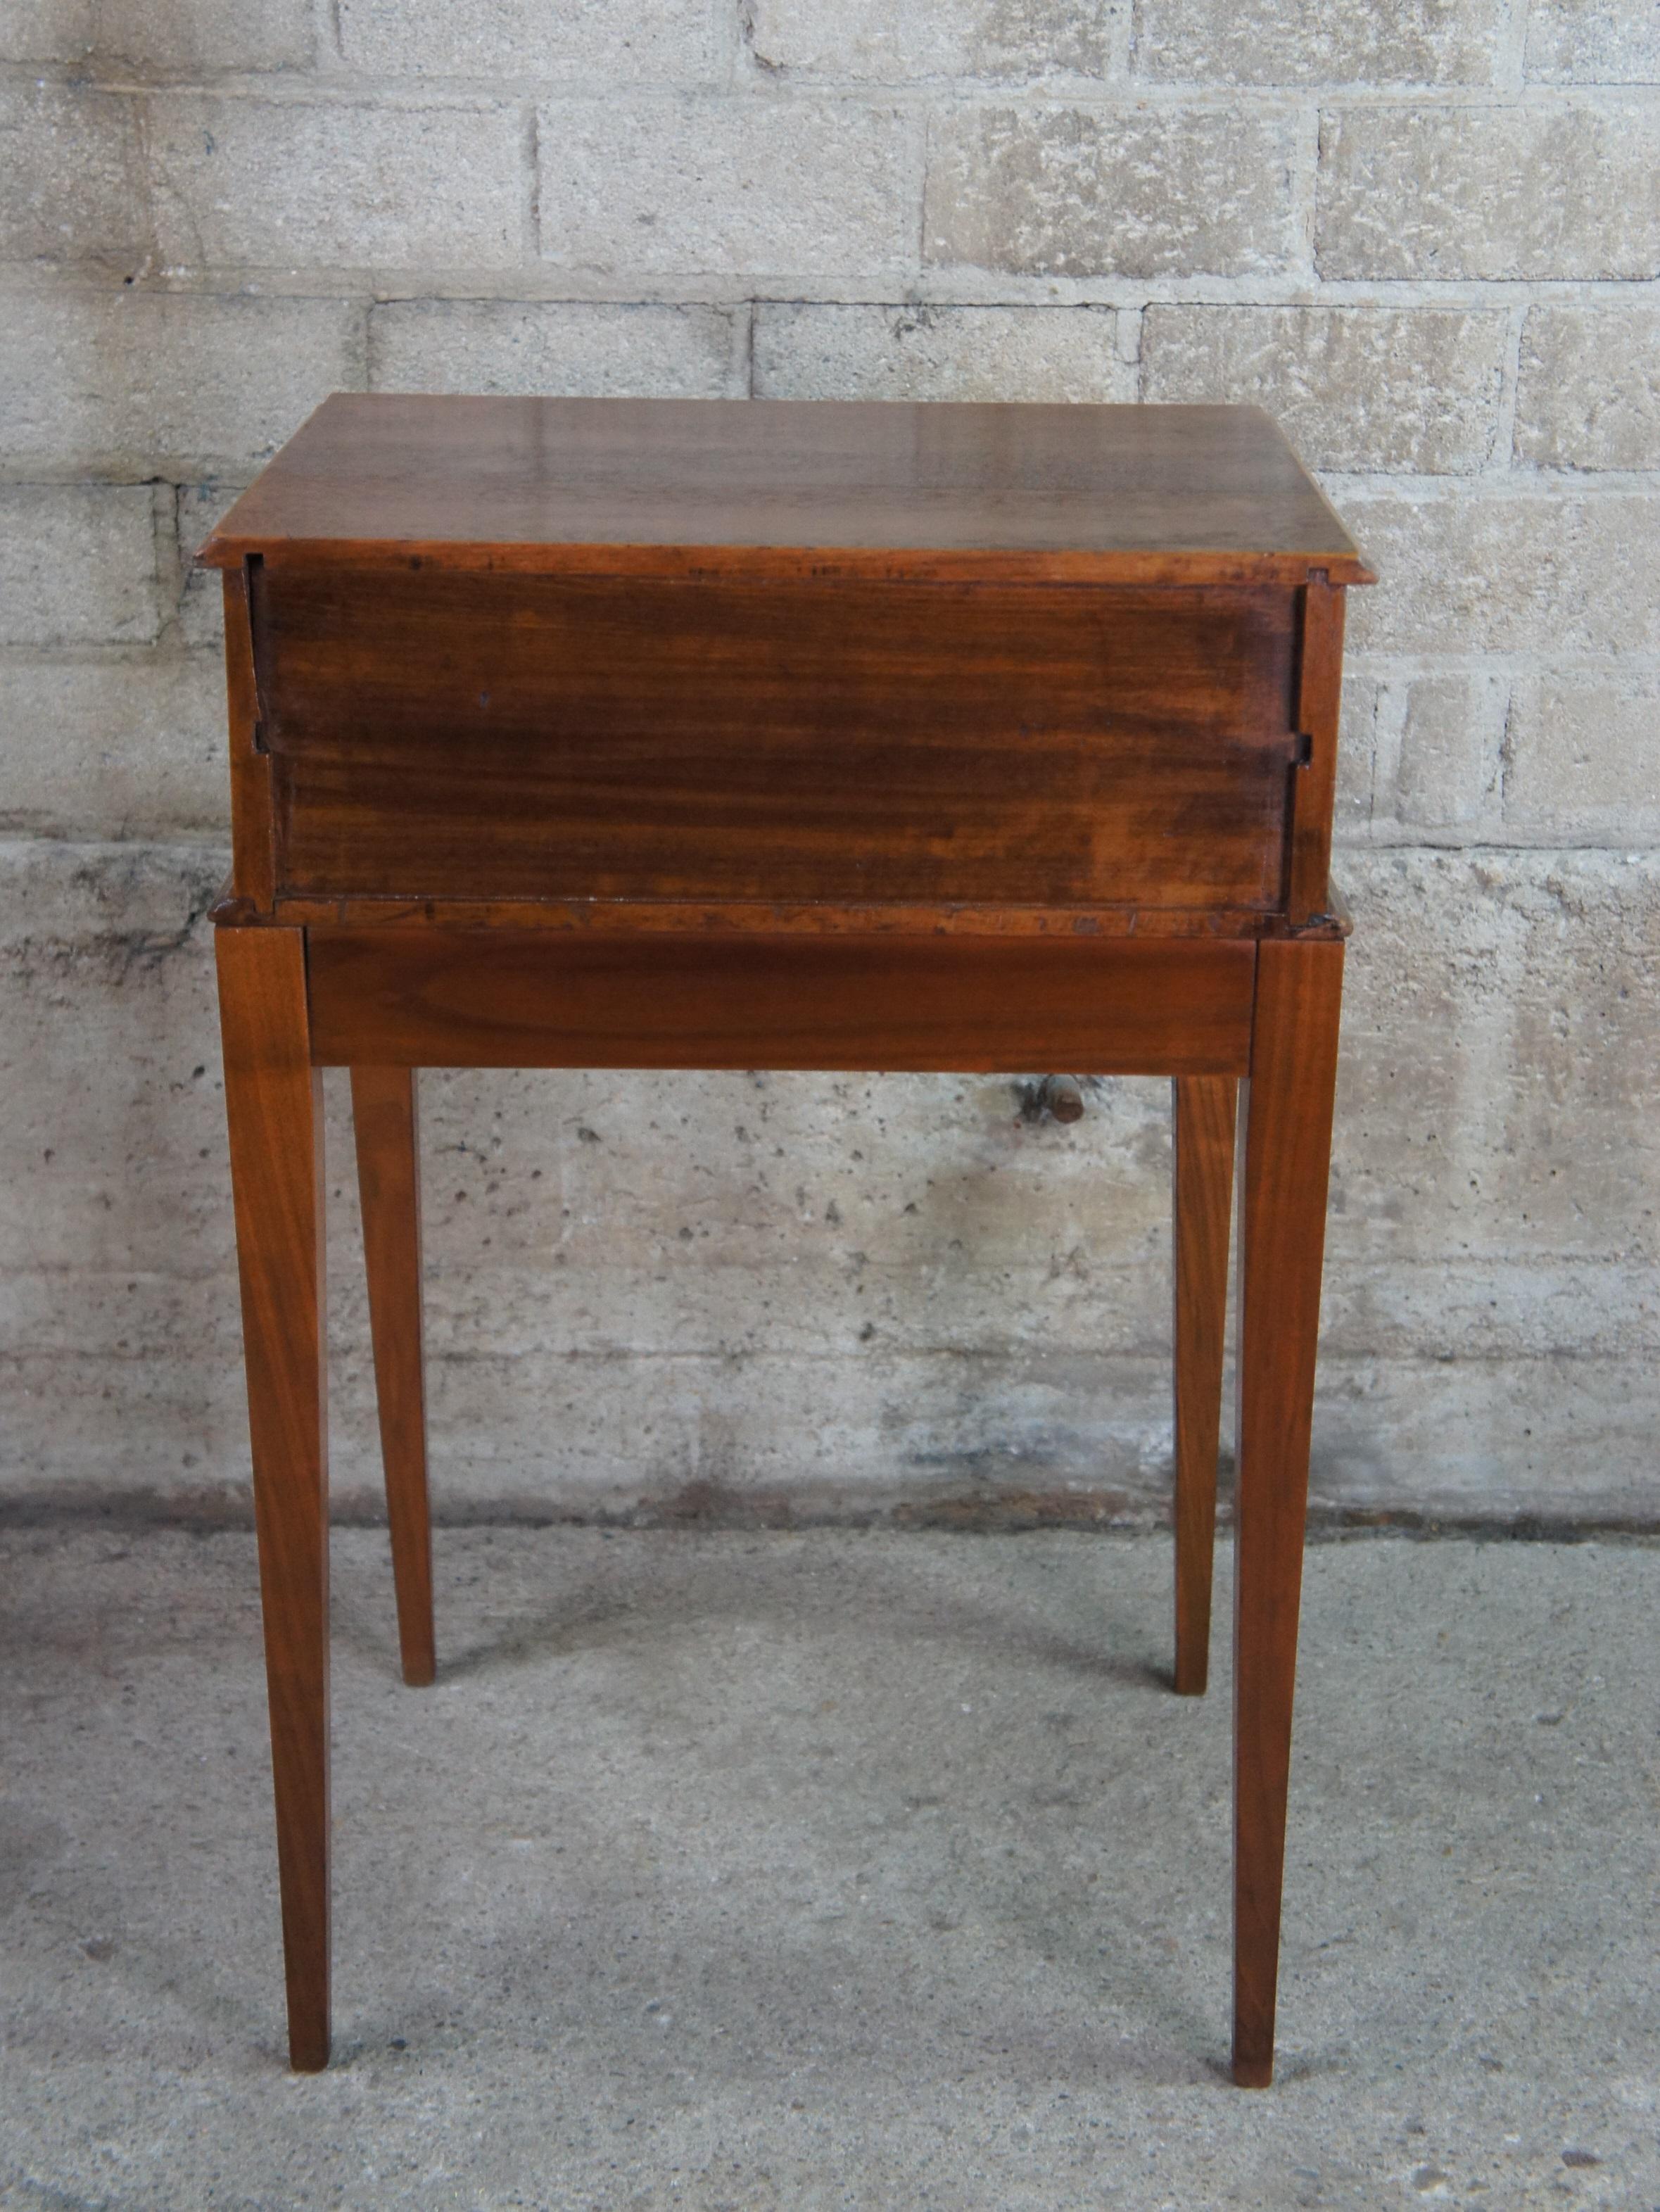 20th Century Antique Early American Walnut 2 Drawer Spool Sewing Cabinet Side Table Stand